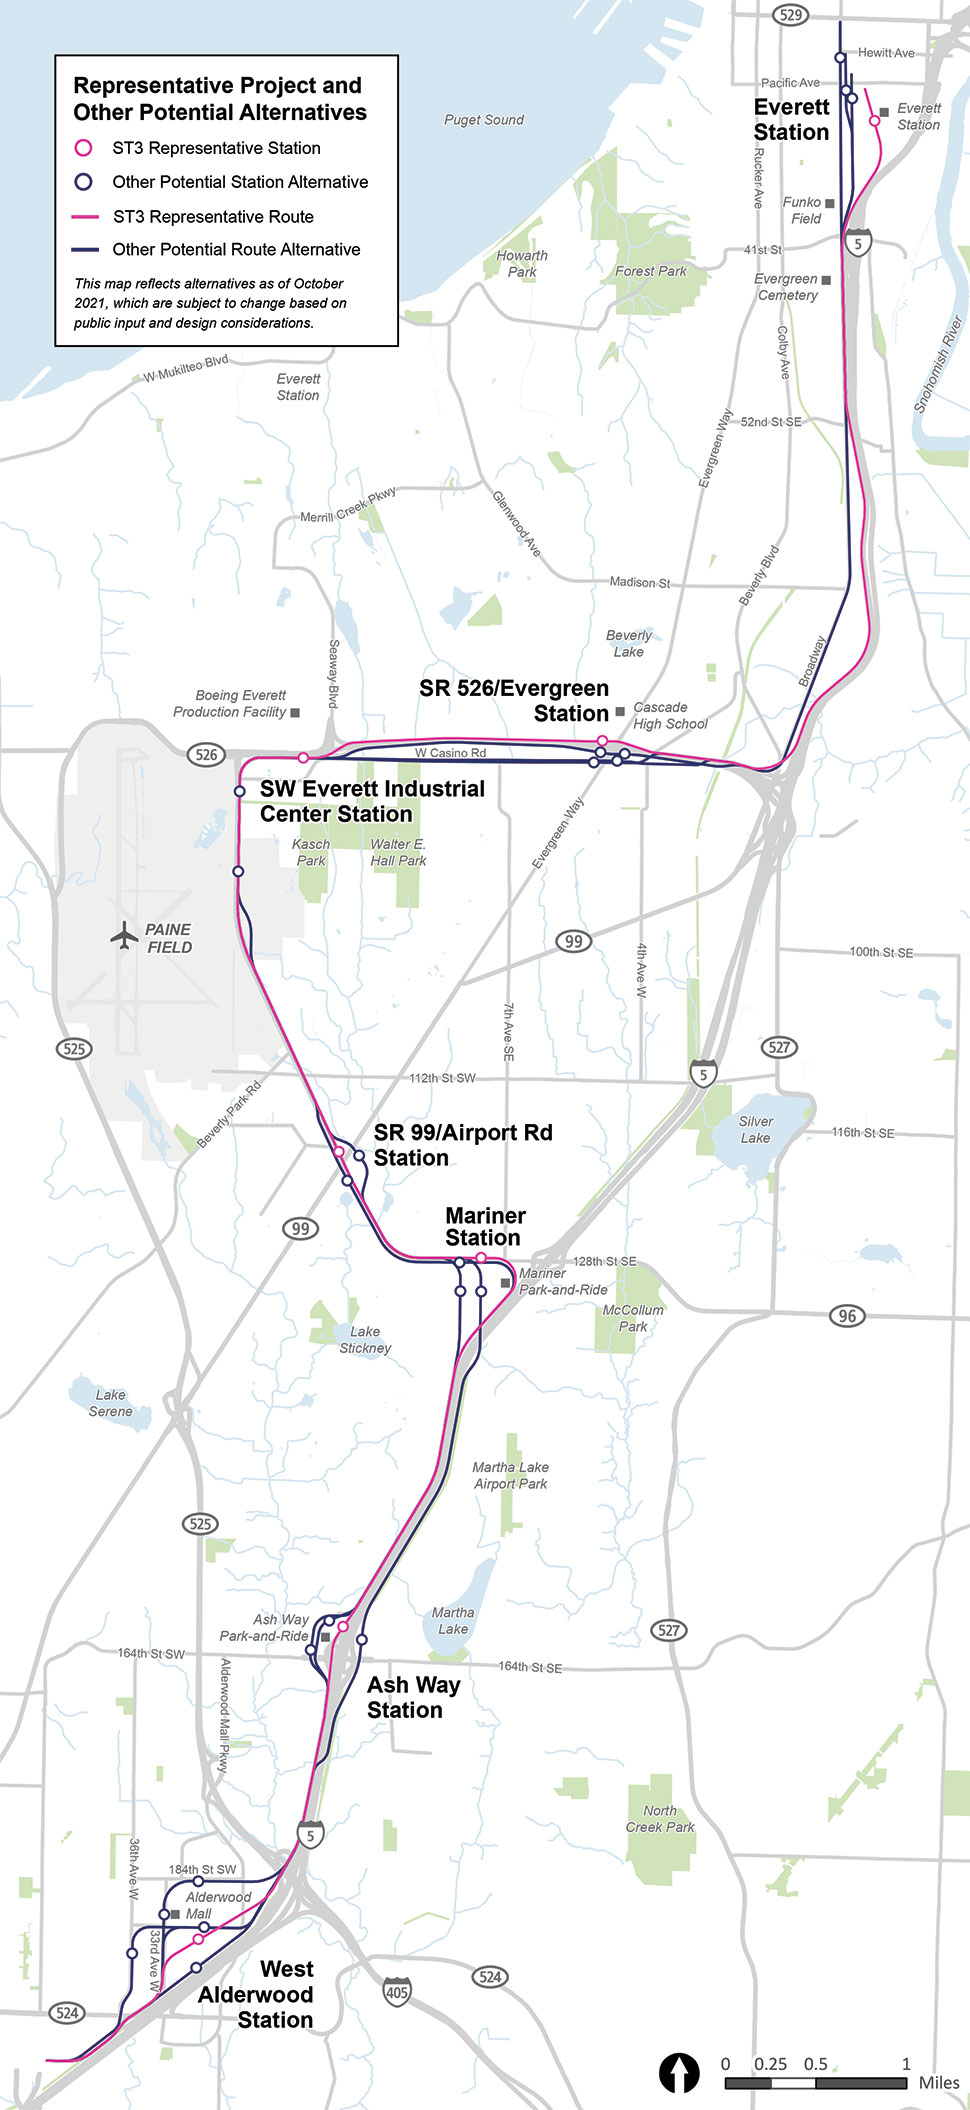 Map of the Everett Link Extension project area.